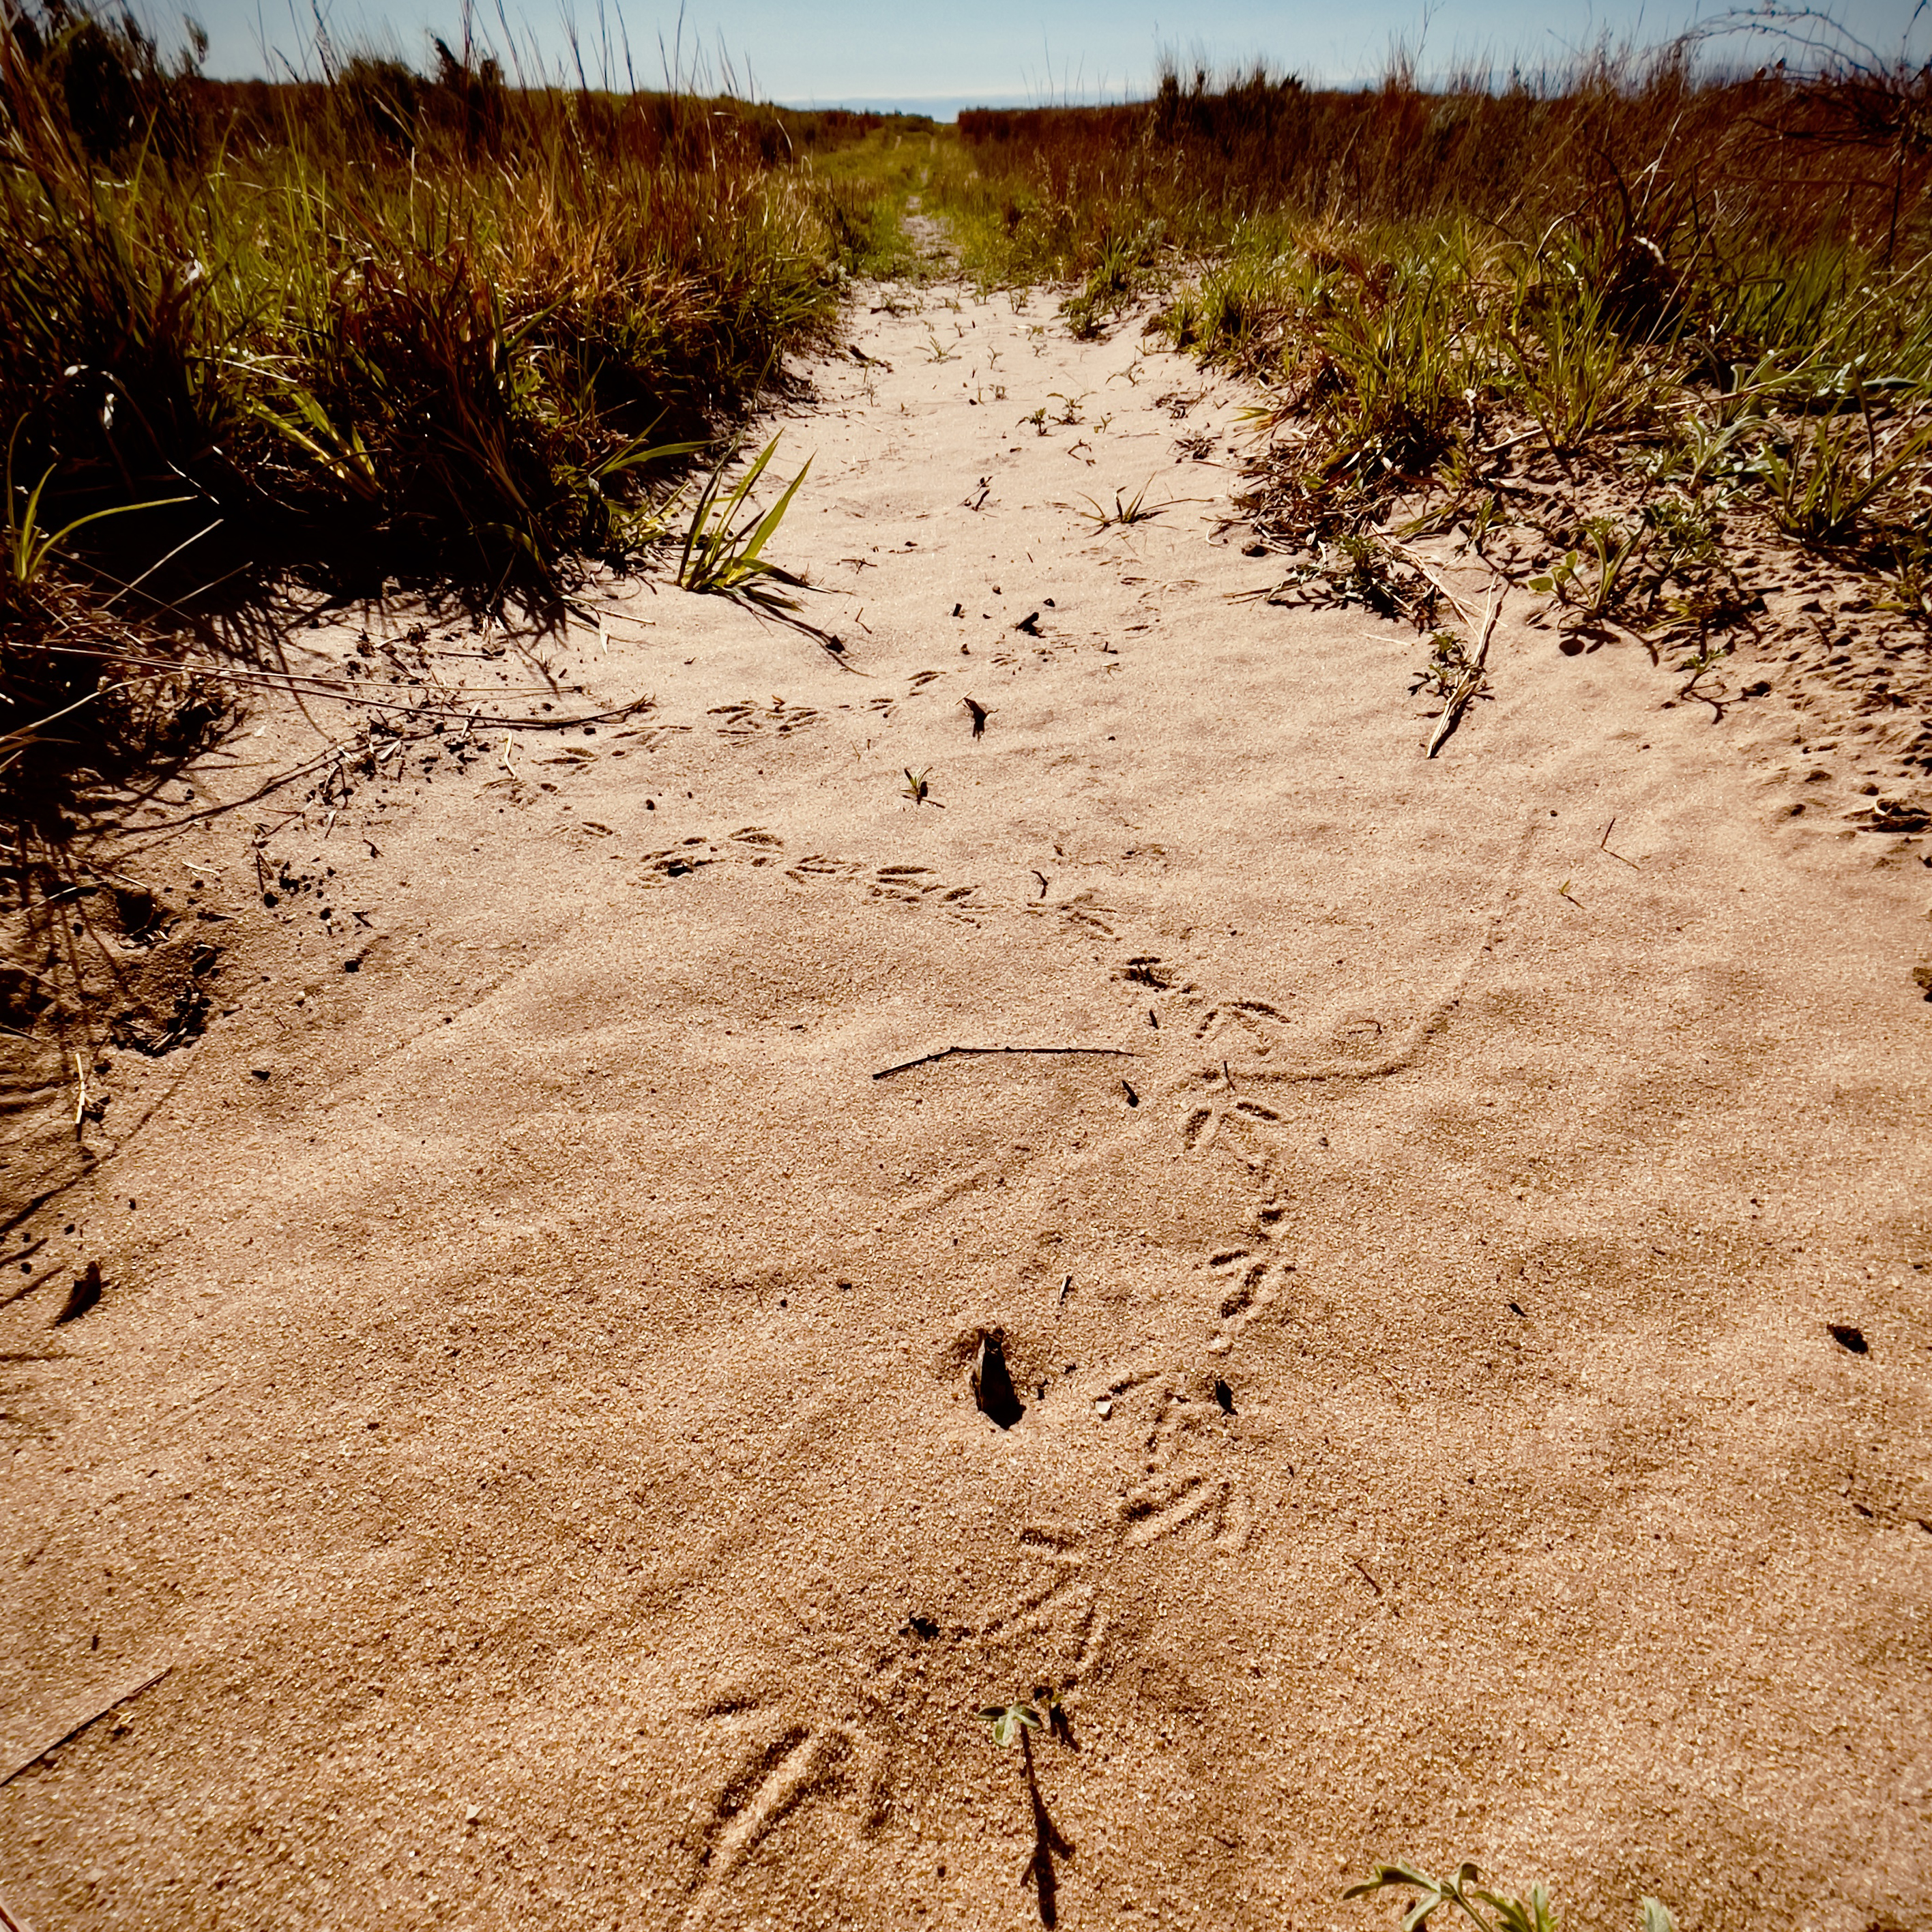  <h2>Making Tracks </h2>While on a recent walk on the prairie near his home in northwest Oklahoma, Quail Forever Journal Editor Chad Love came across the meandering tracks of a lone, wandering bobwhite quail.